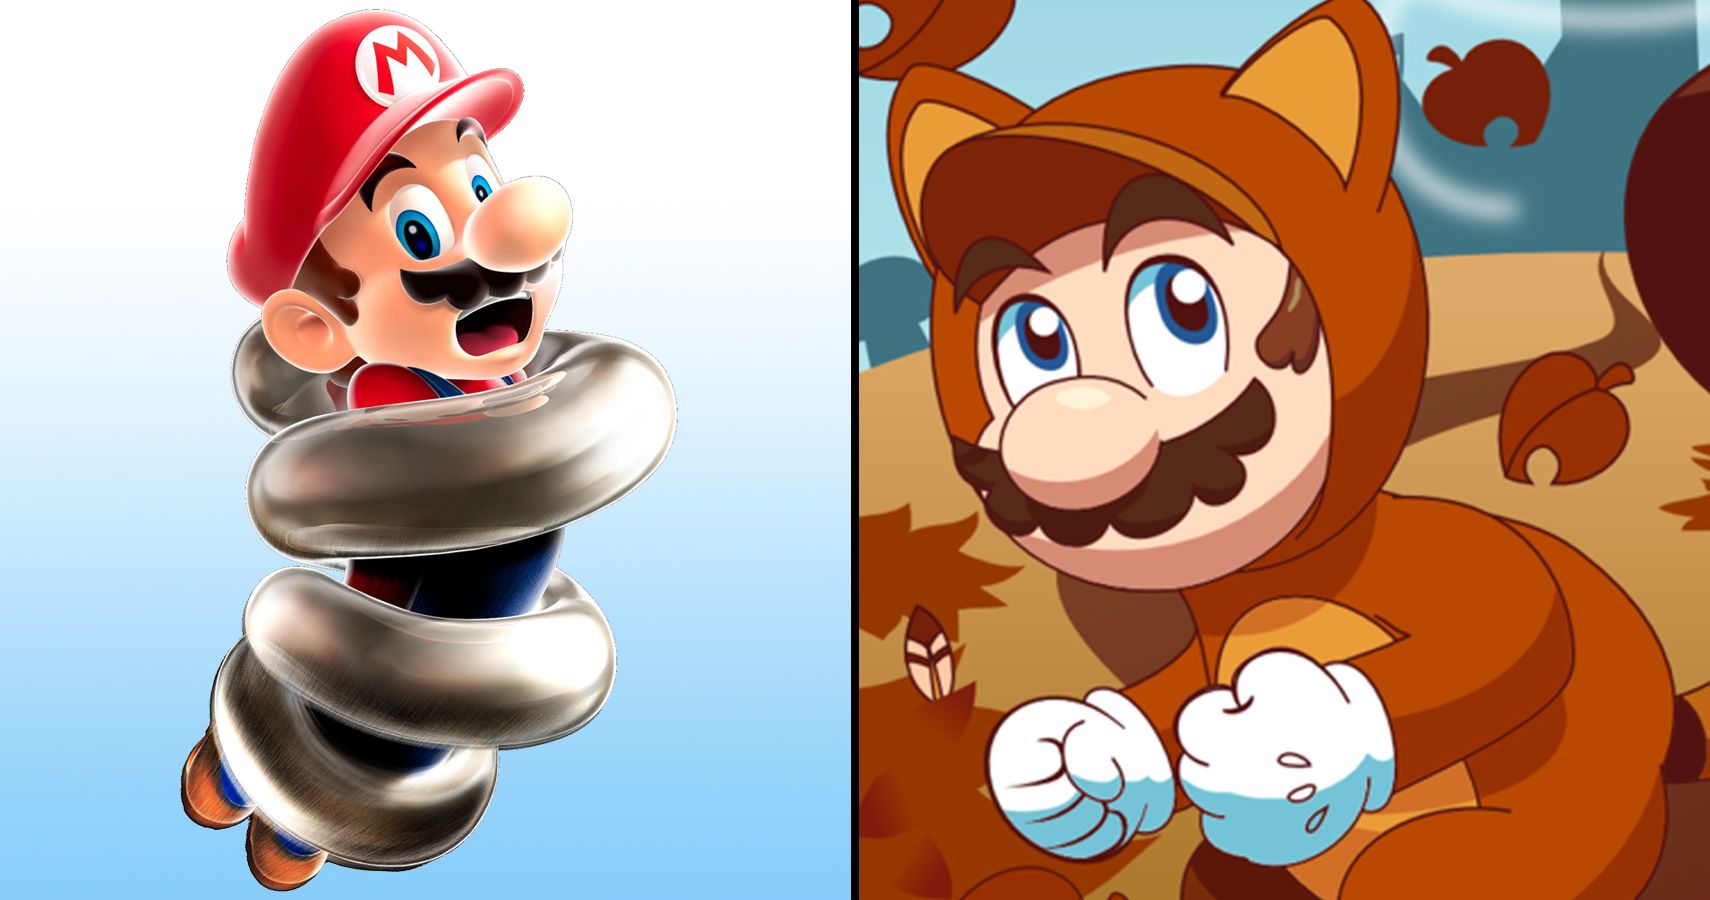 The 10 Best And 10 Most Useless Power Ups In Super Mario